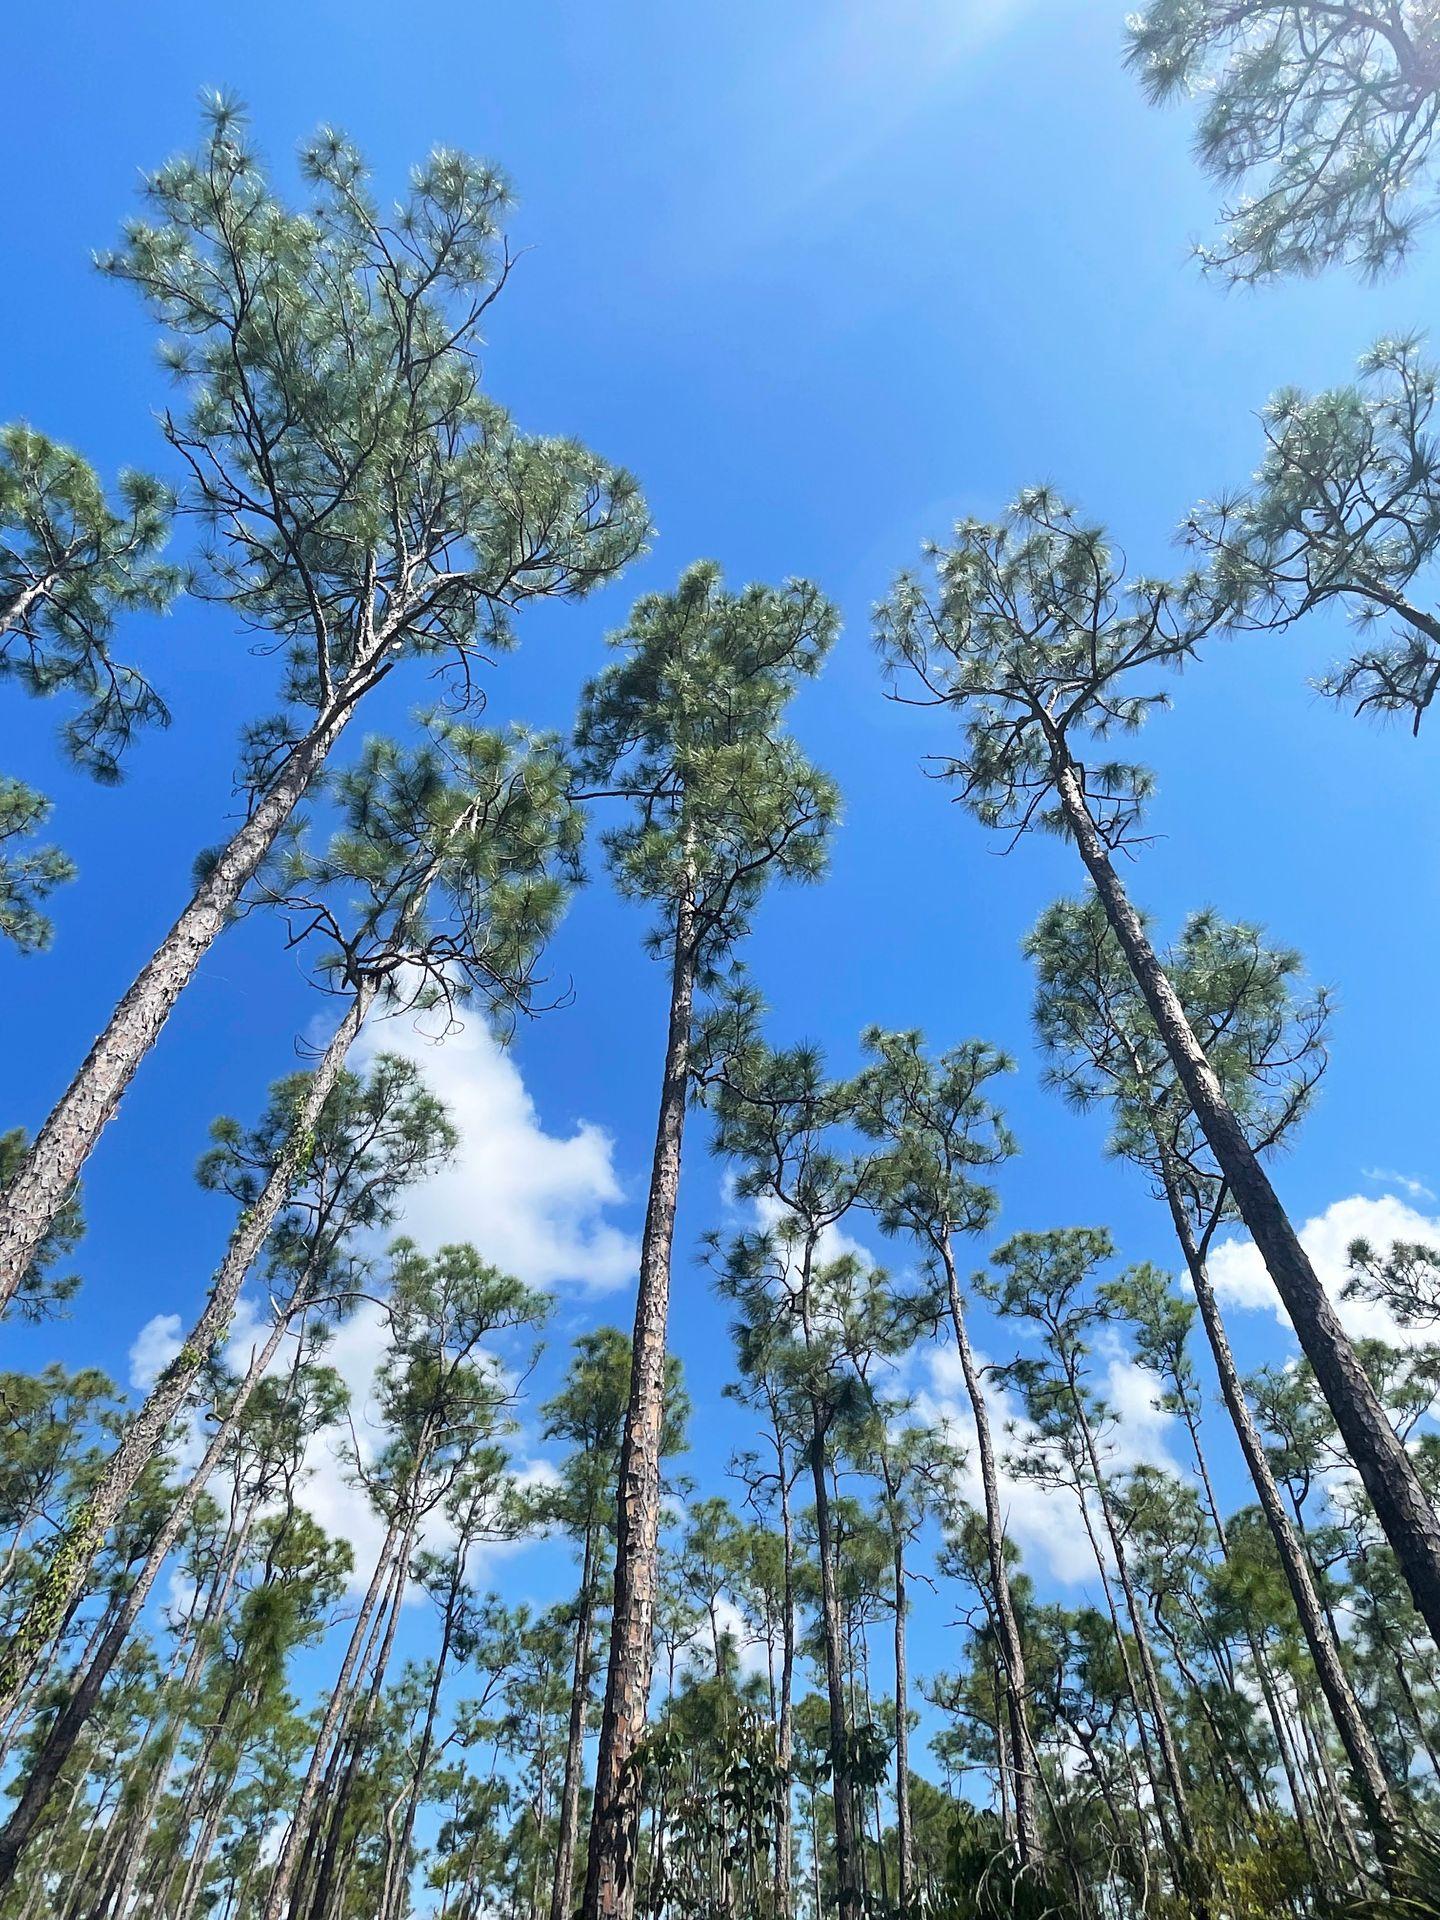 Looking up at tall, skinny pine trees against a blue sky